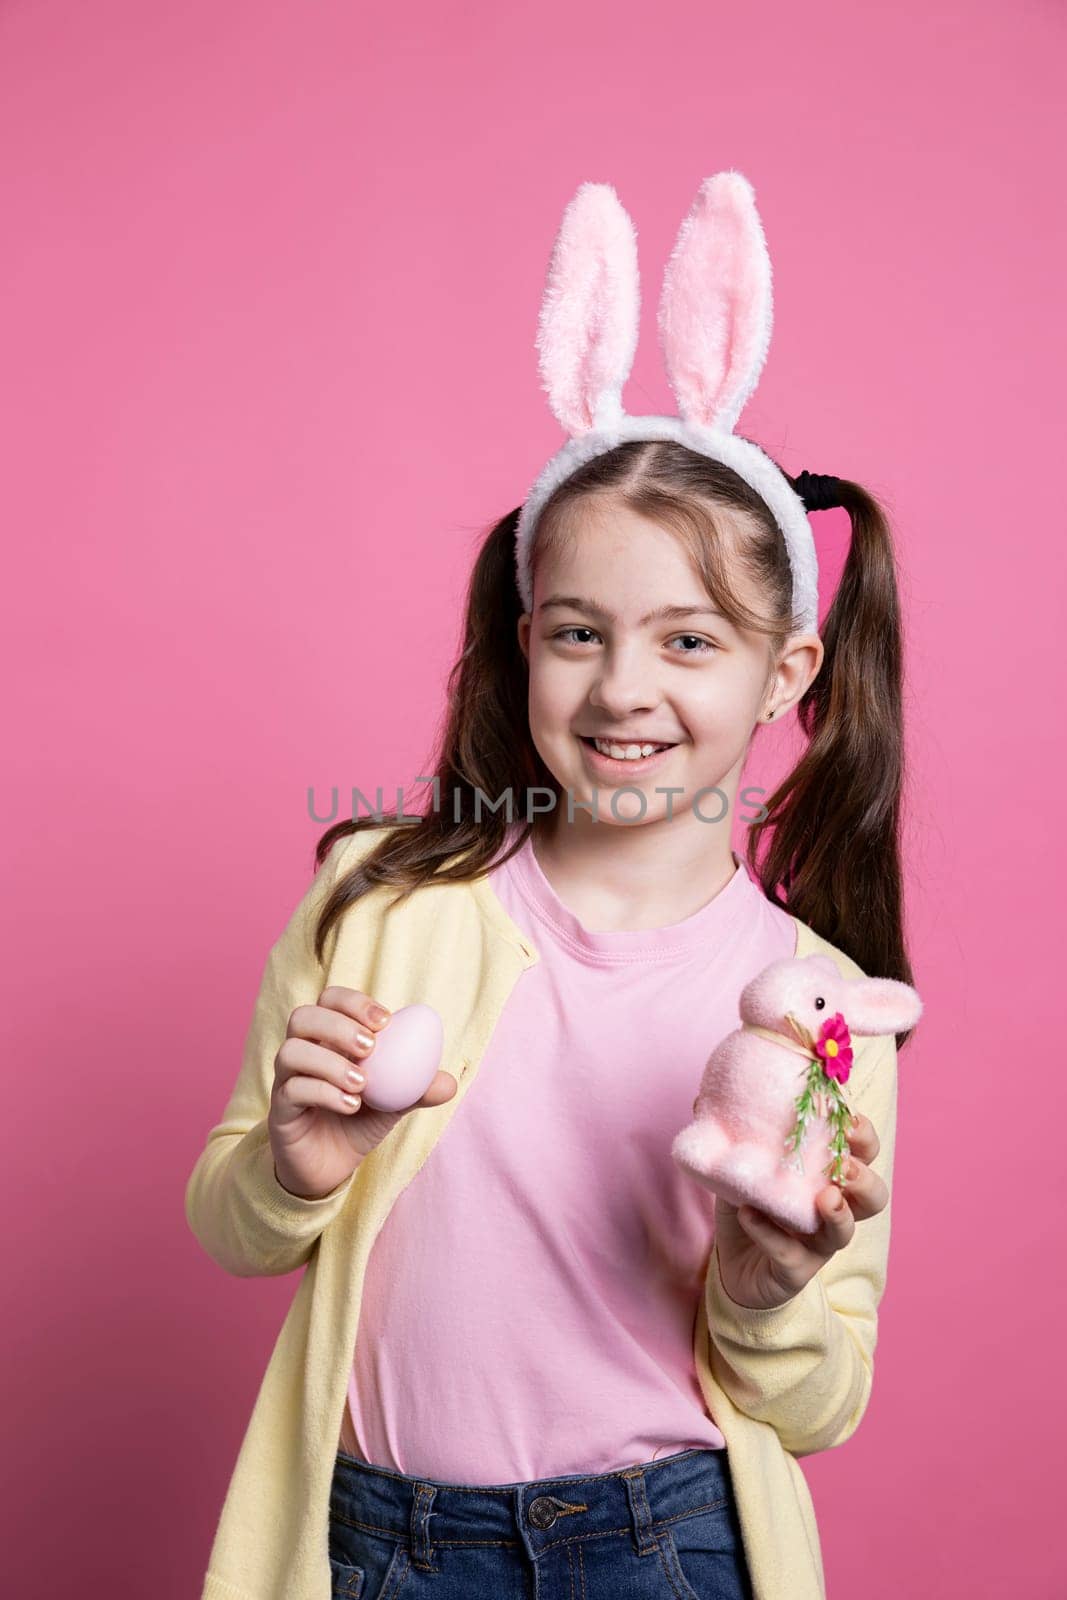 Optimistic small kid posing with painted eggs and a pink rabbit toy by DCStudio